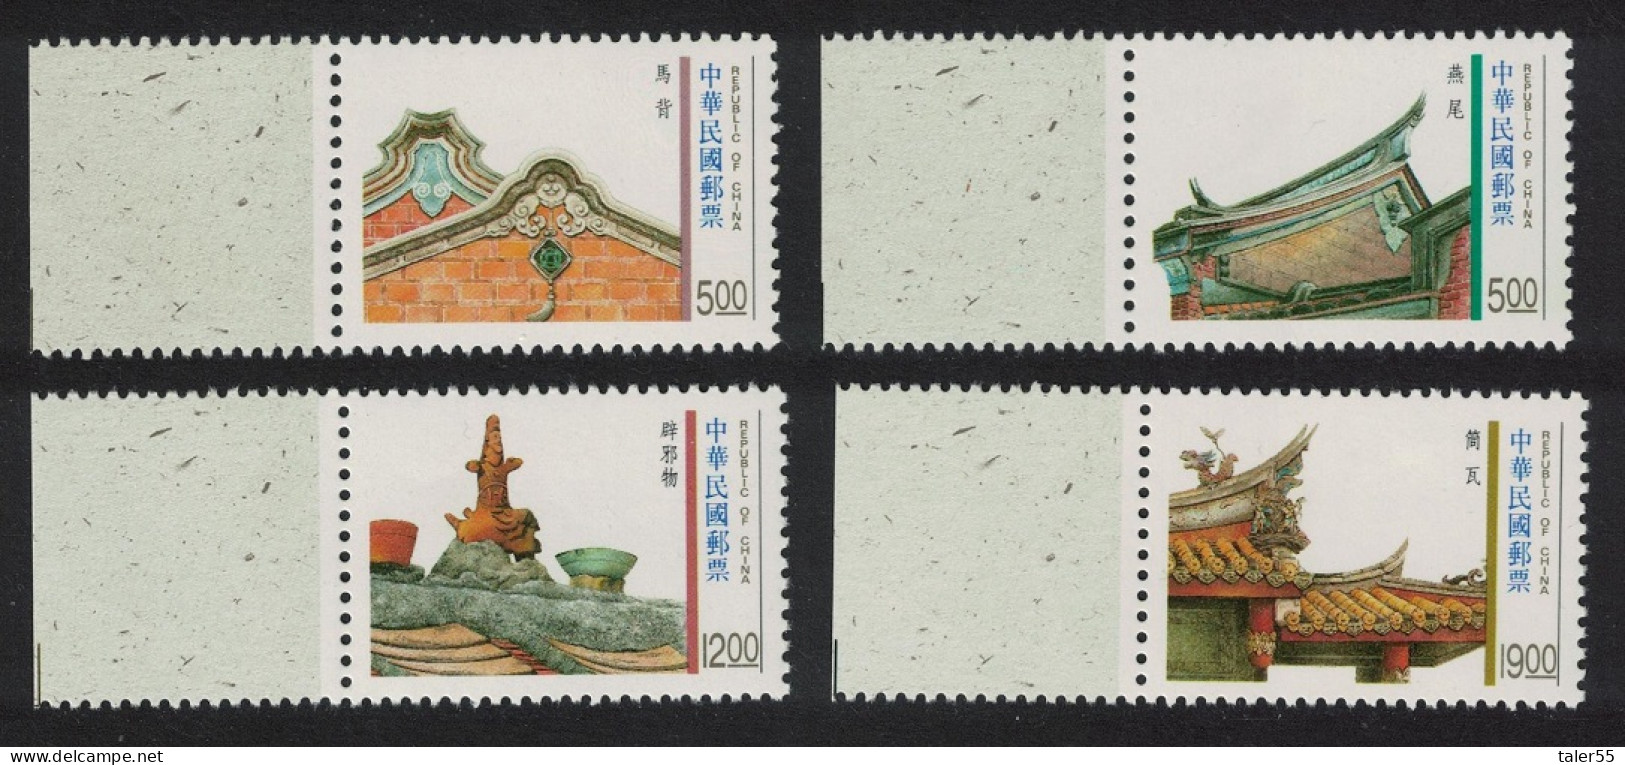 Taiwan Traditional Architecture Roof Styles 4v Margins 1995 MNH SG#2224-2227 - Unused Stamps